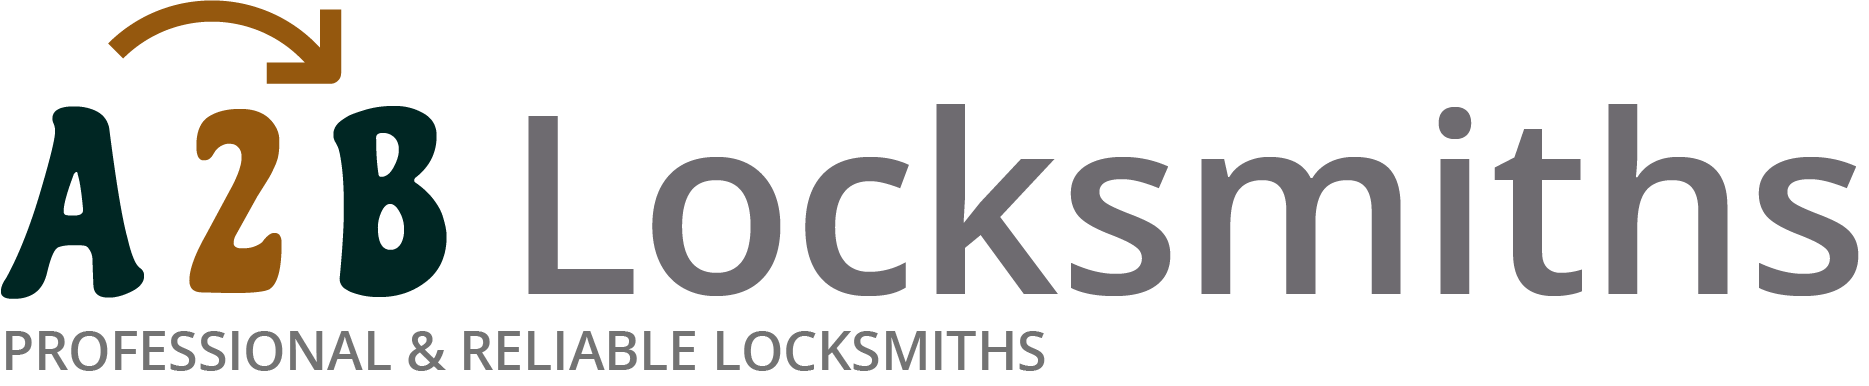 If you are locked out of house in Wokingham, our 24/7 local emergency locksmith services can help you.